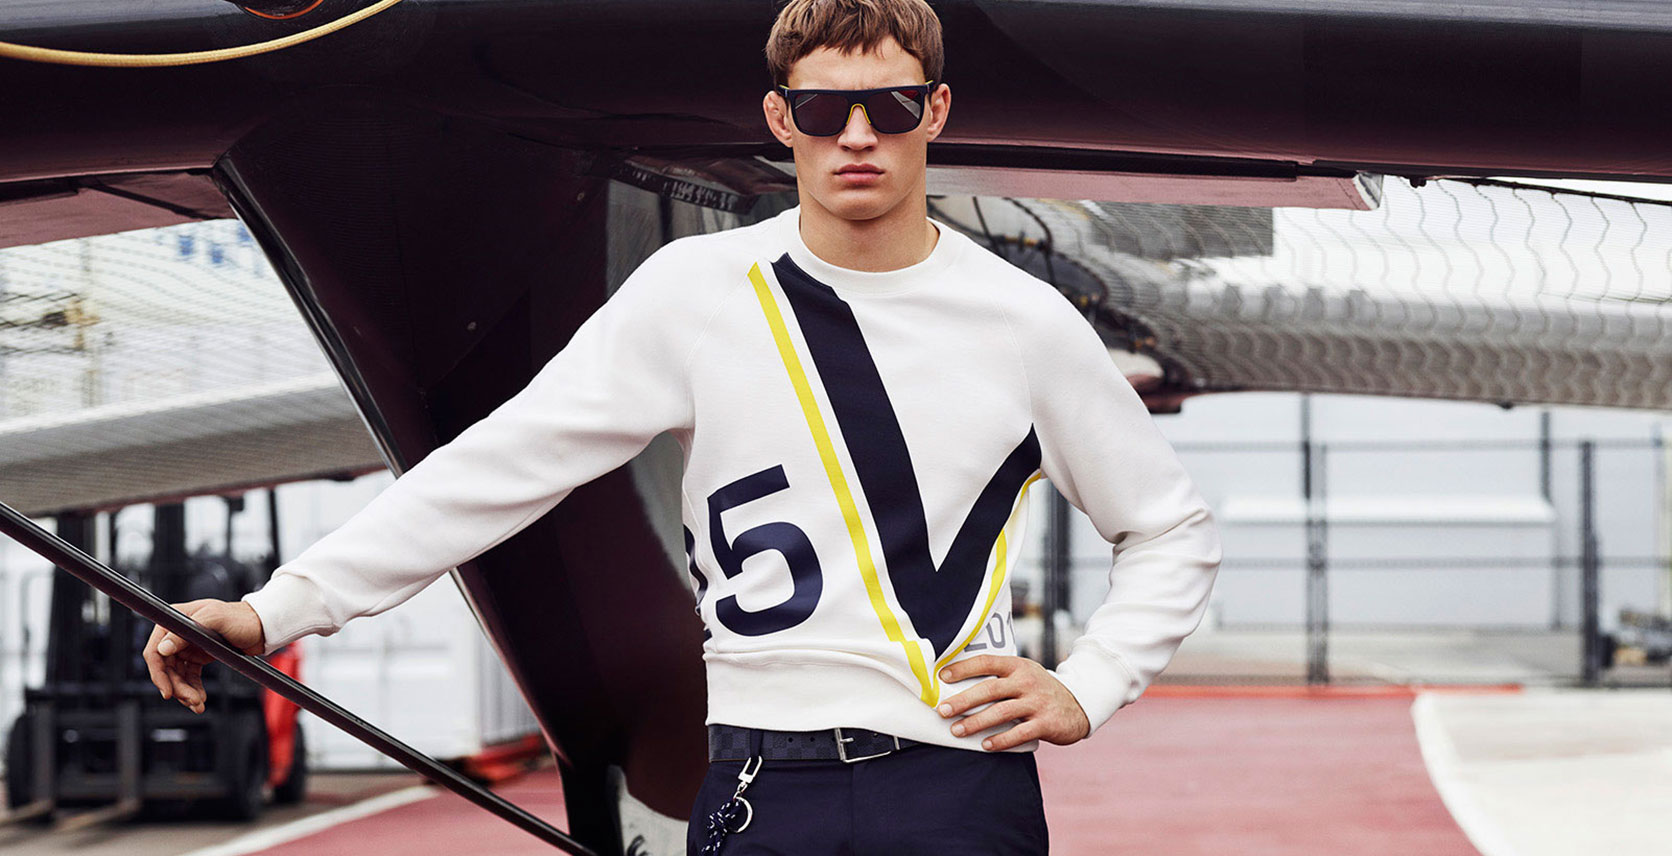 Louis Vuitton Just Dropped the Perfect Gear for Lolling on a Yacht